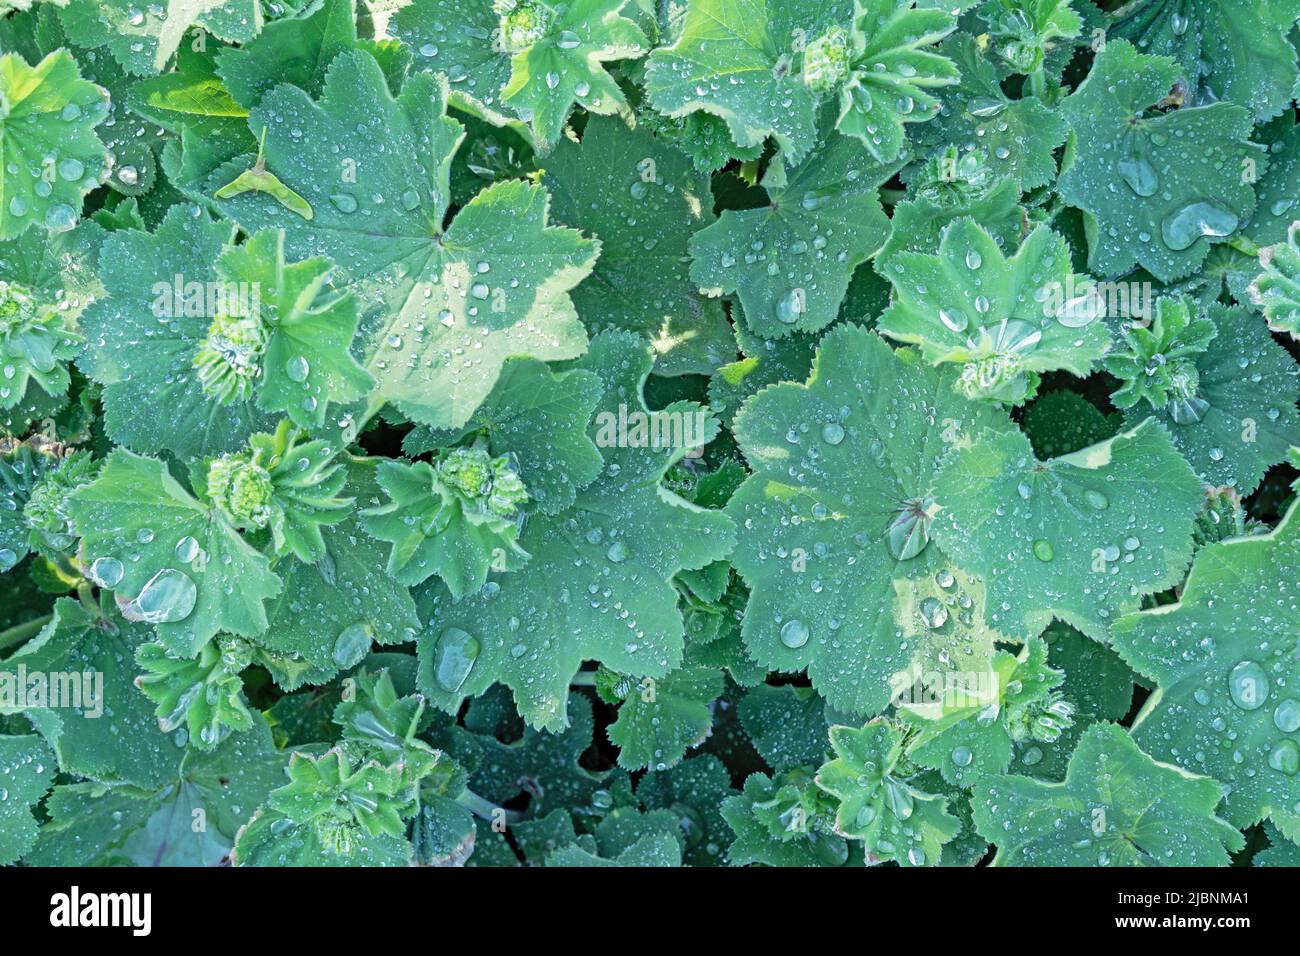 Common cuff (lat. Alchemilla vulgaris) is a perennial herbaceous medicinal plant with drops of water after rain on green terry leaves. Stock Photo